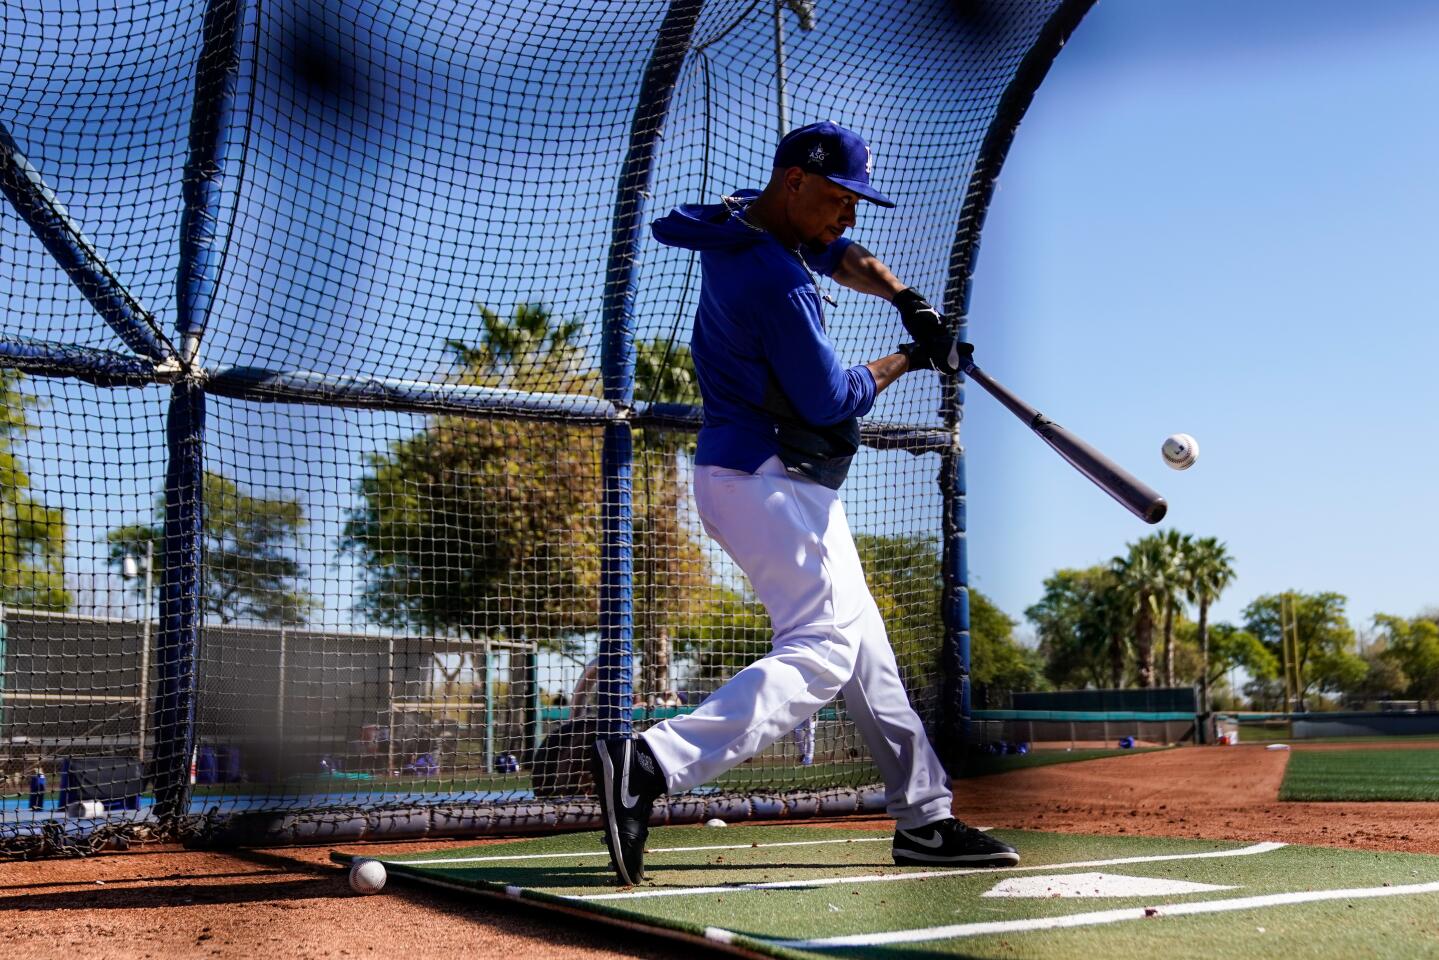 Dodgers right fielder Mookie Betts takes batting practice during a spring training workout at Camelback Ranch.